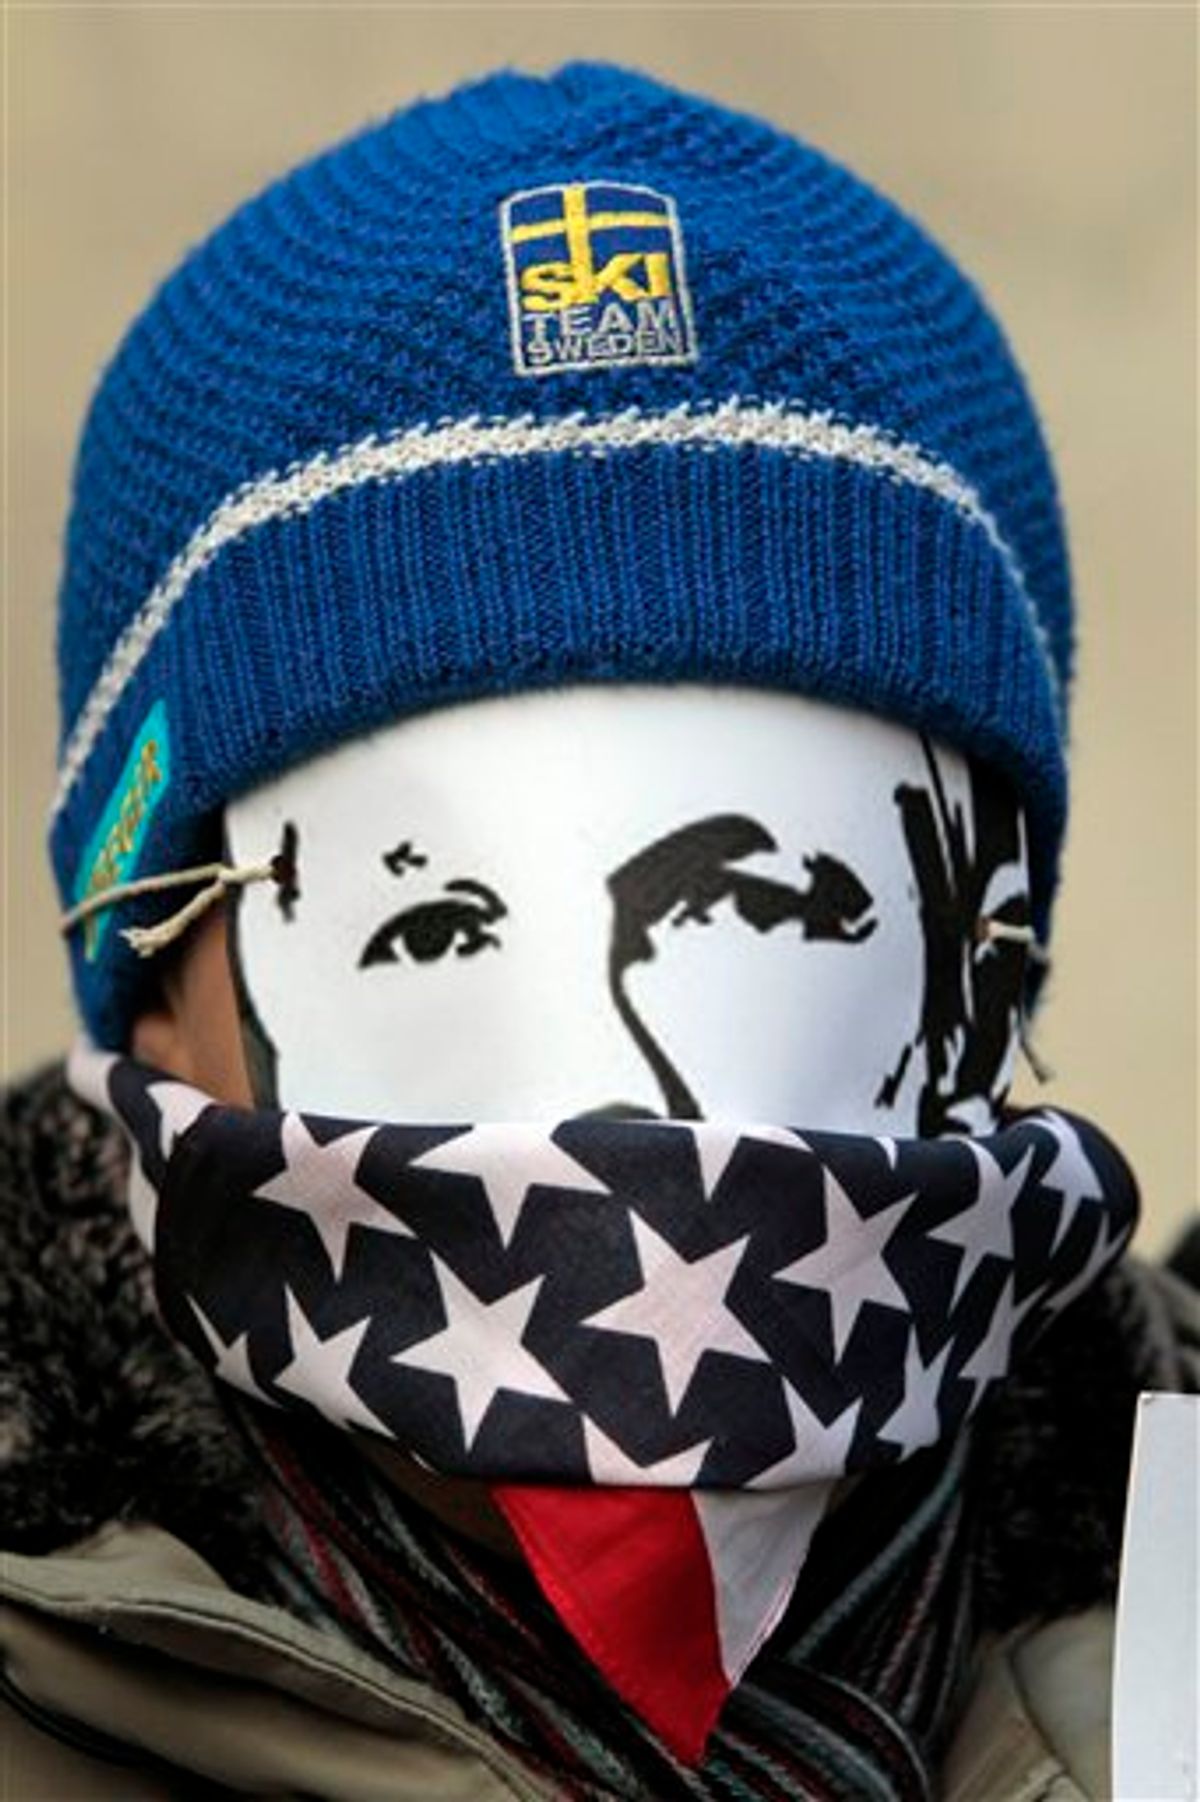 A supporters of WikiLeaks founder Julian Assange, wearing a mask depicting him and a US flag on his mouth, partiipates at  demonstrate outside theS wedish Embassy In central London, Monday, Dec. 13, 2010 Assange remains in a U.K. jail ahead of a Dec. 14 hearing where he plans to fight Sweden's request to extradite him to face sex crimes allegations there. (AP Photo/Lefteris Pitarakis)  (AP)